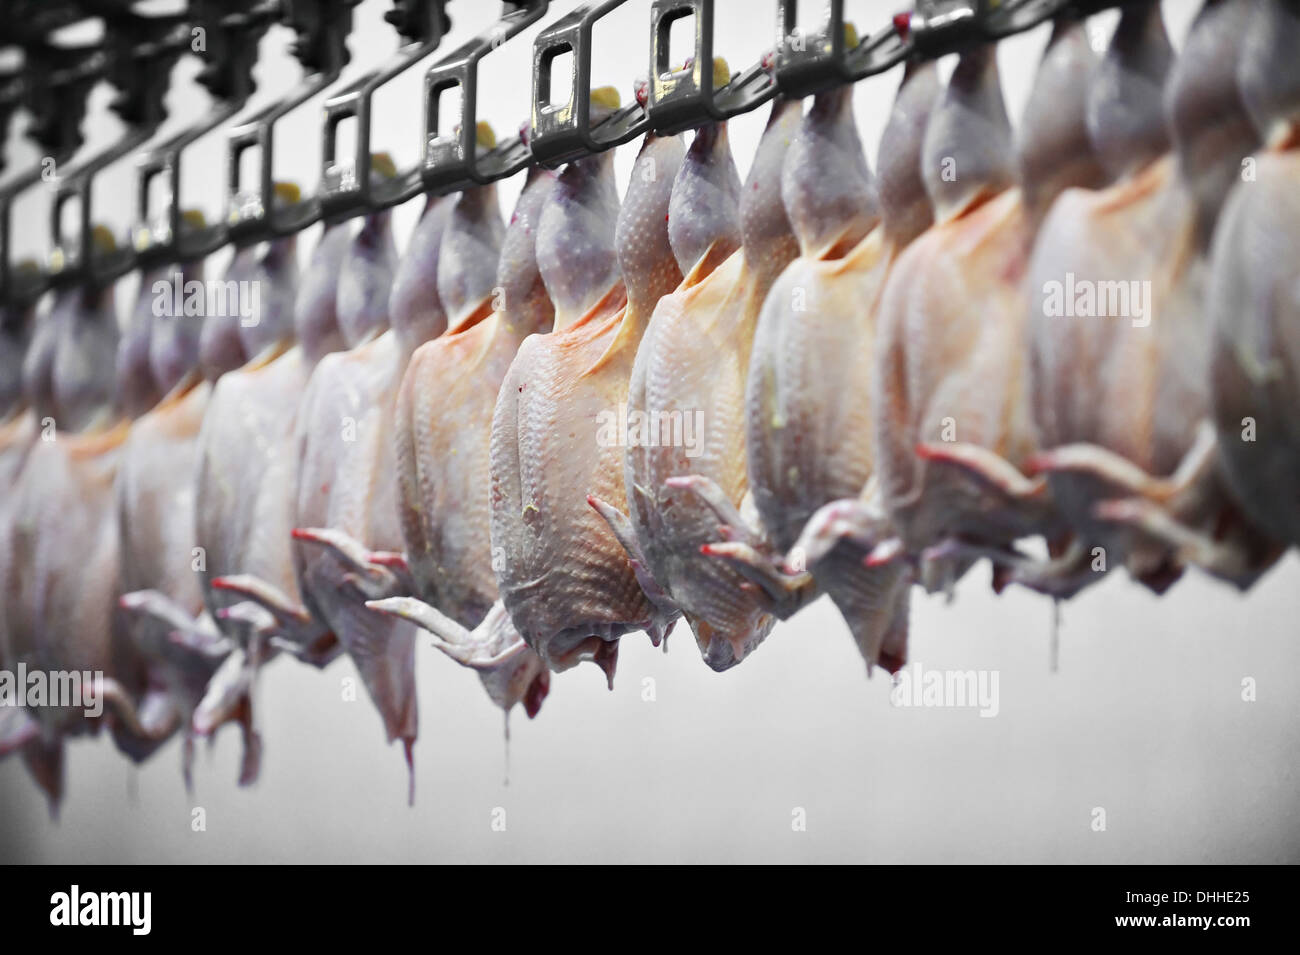 Food industry detail with poultry meat processing Stock Photo